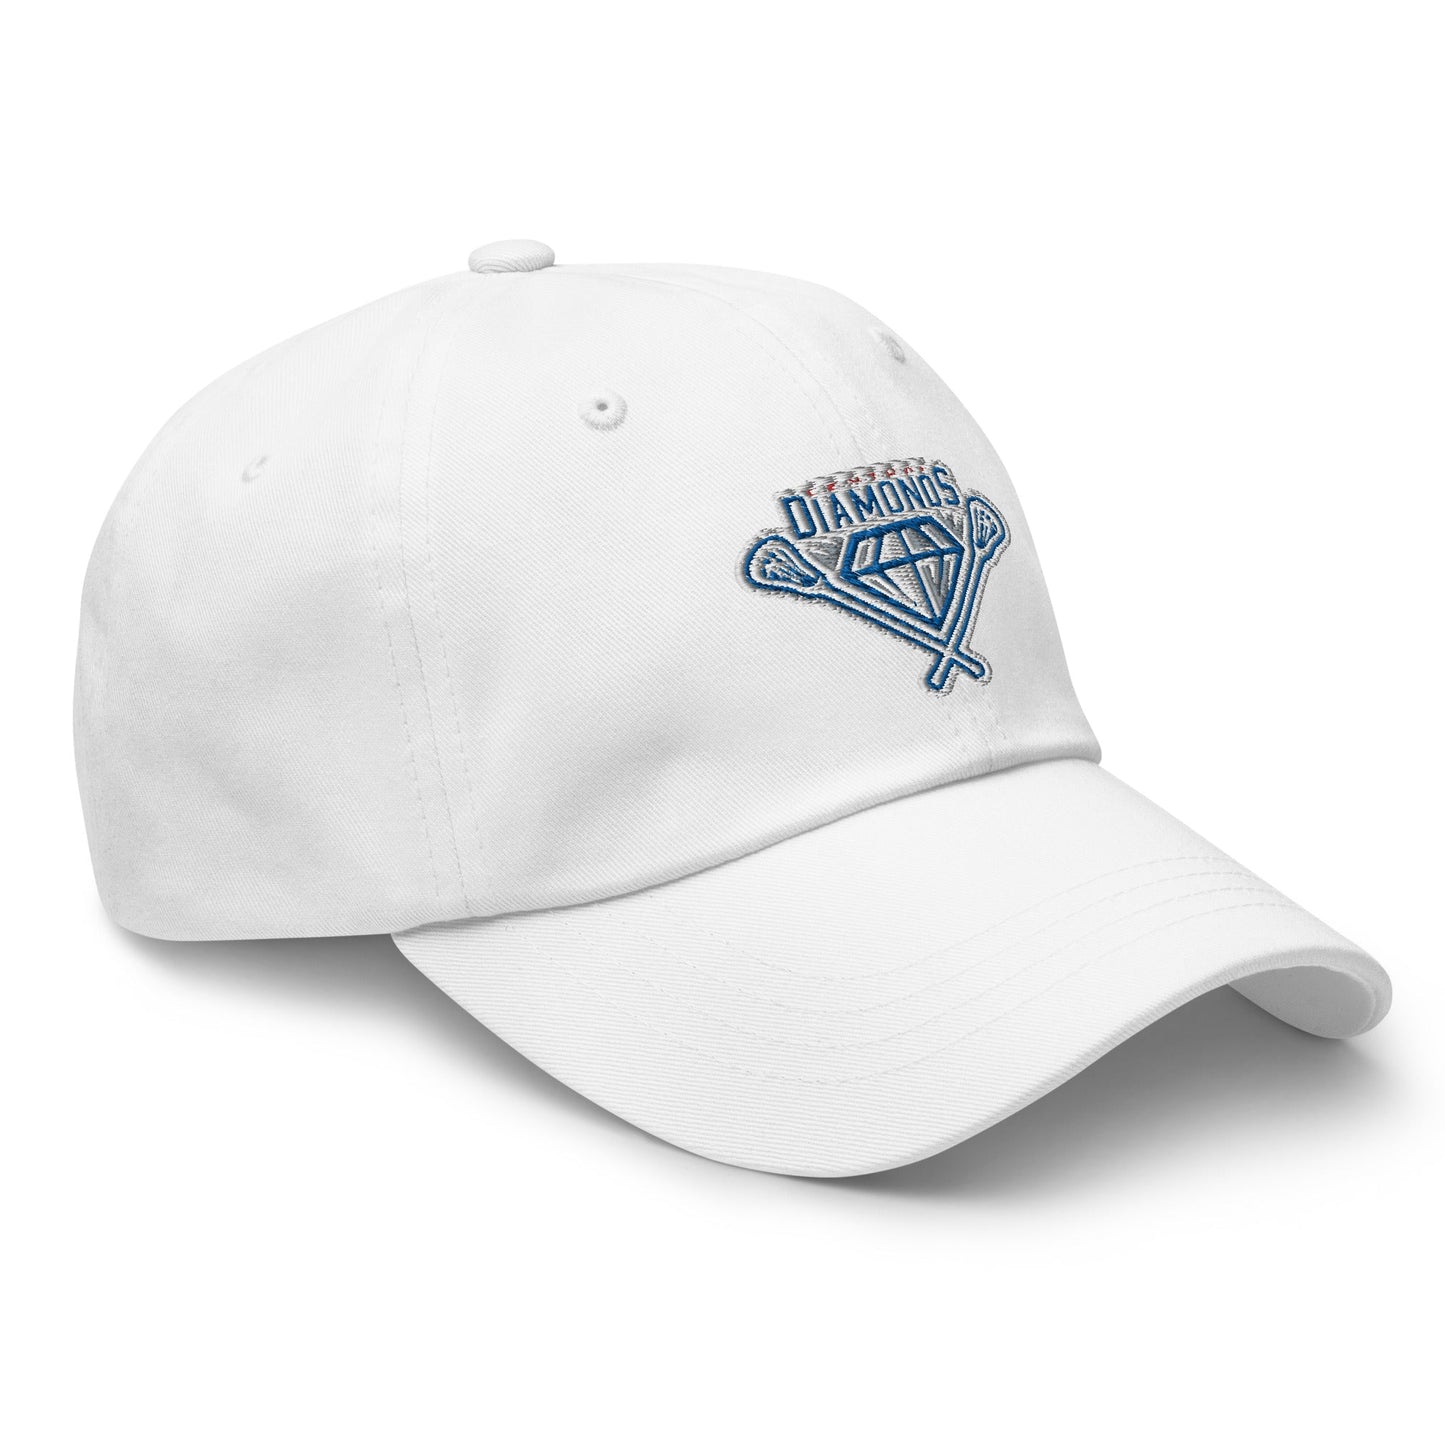 Central Diamonds Embroidered Dad Hat Signature Lacrosse